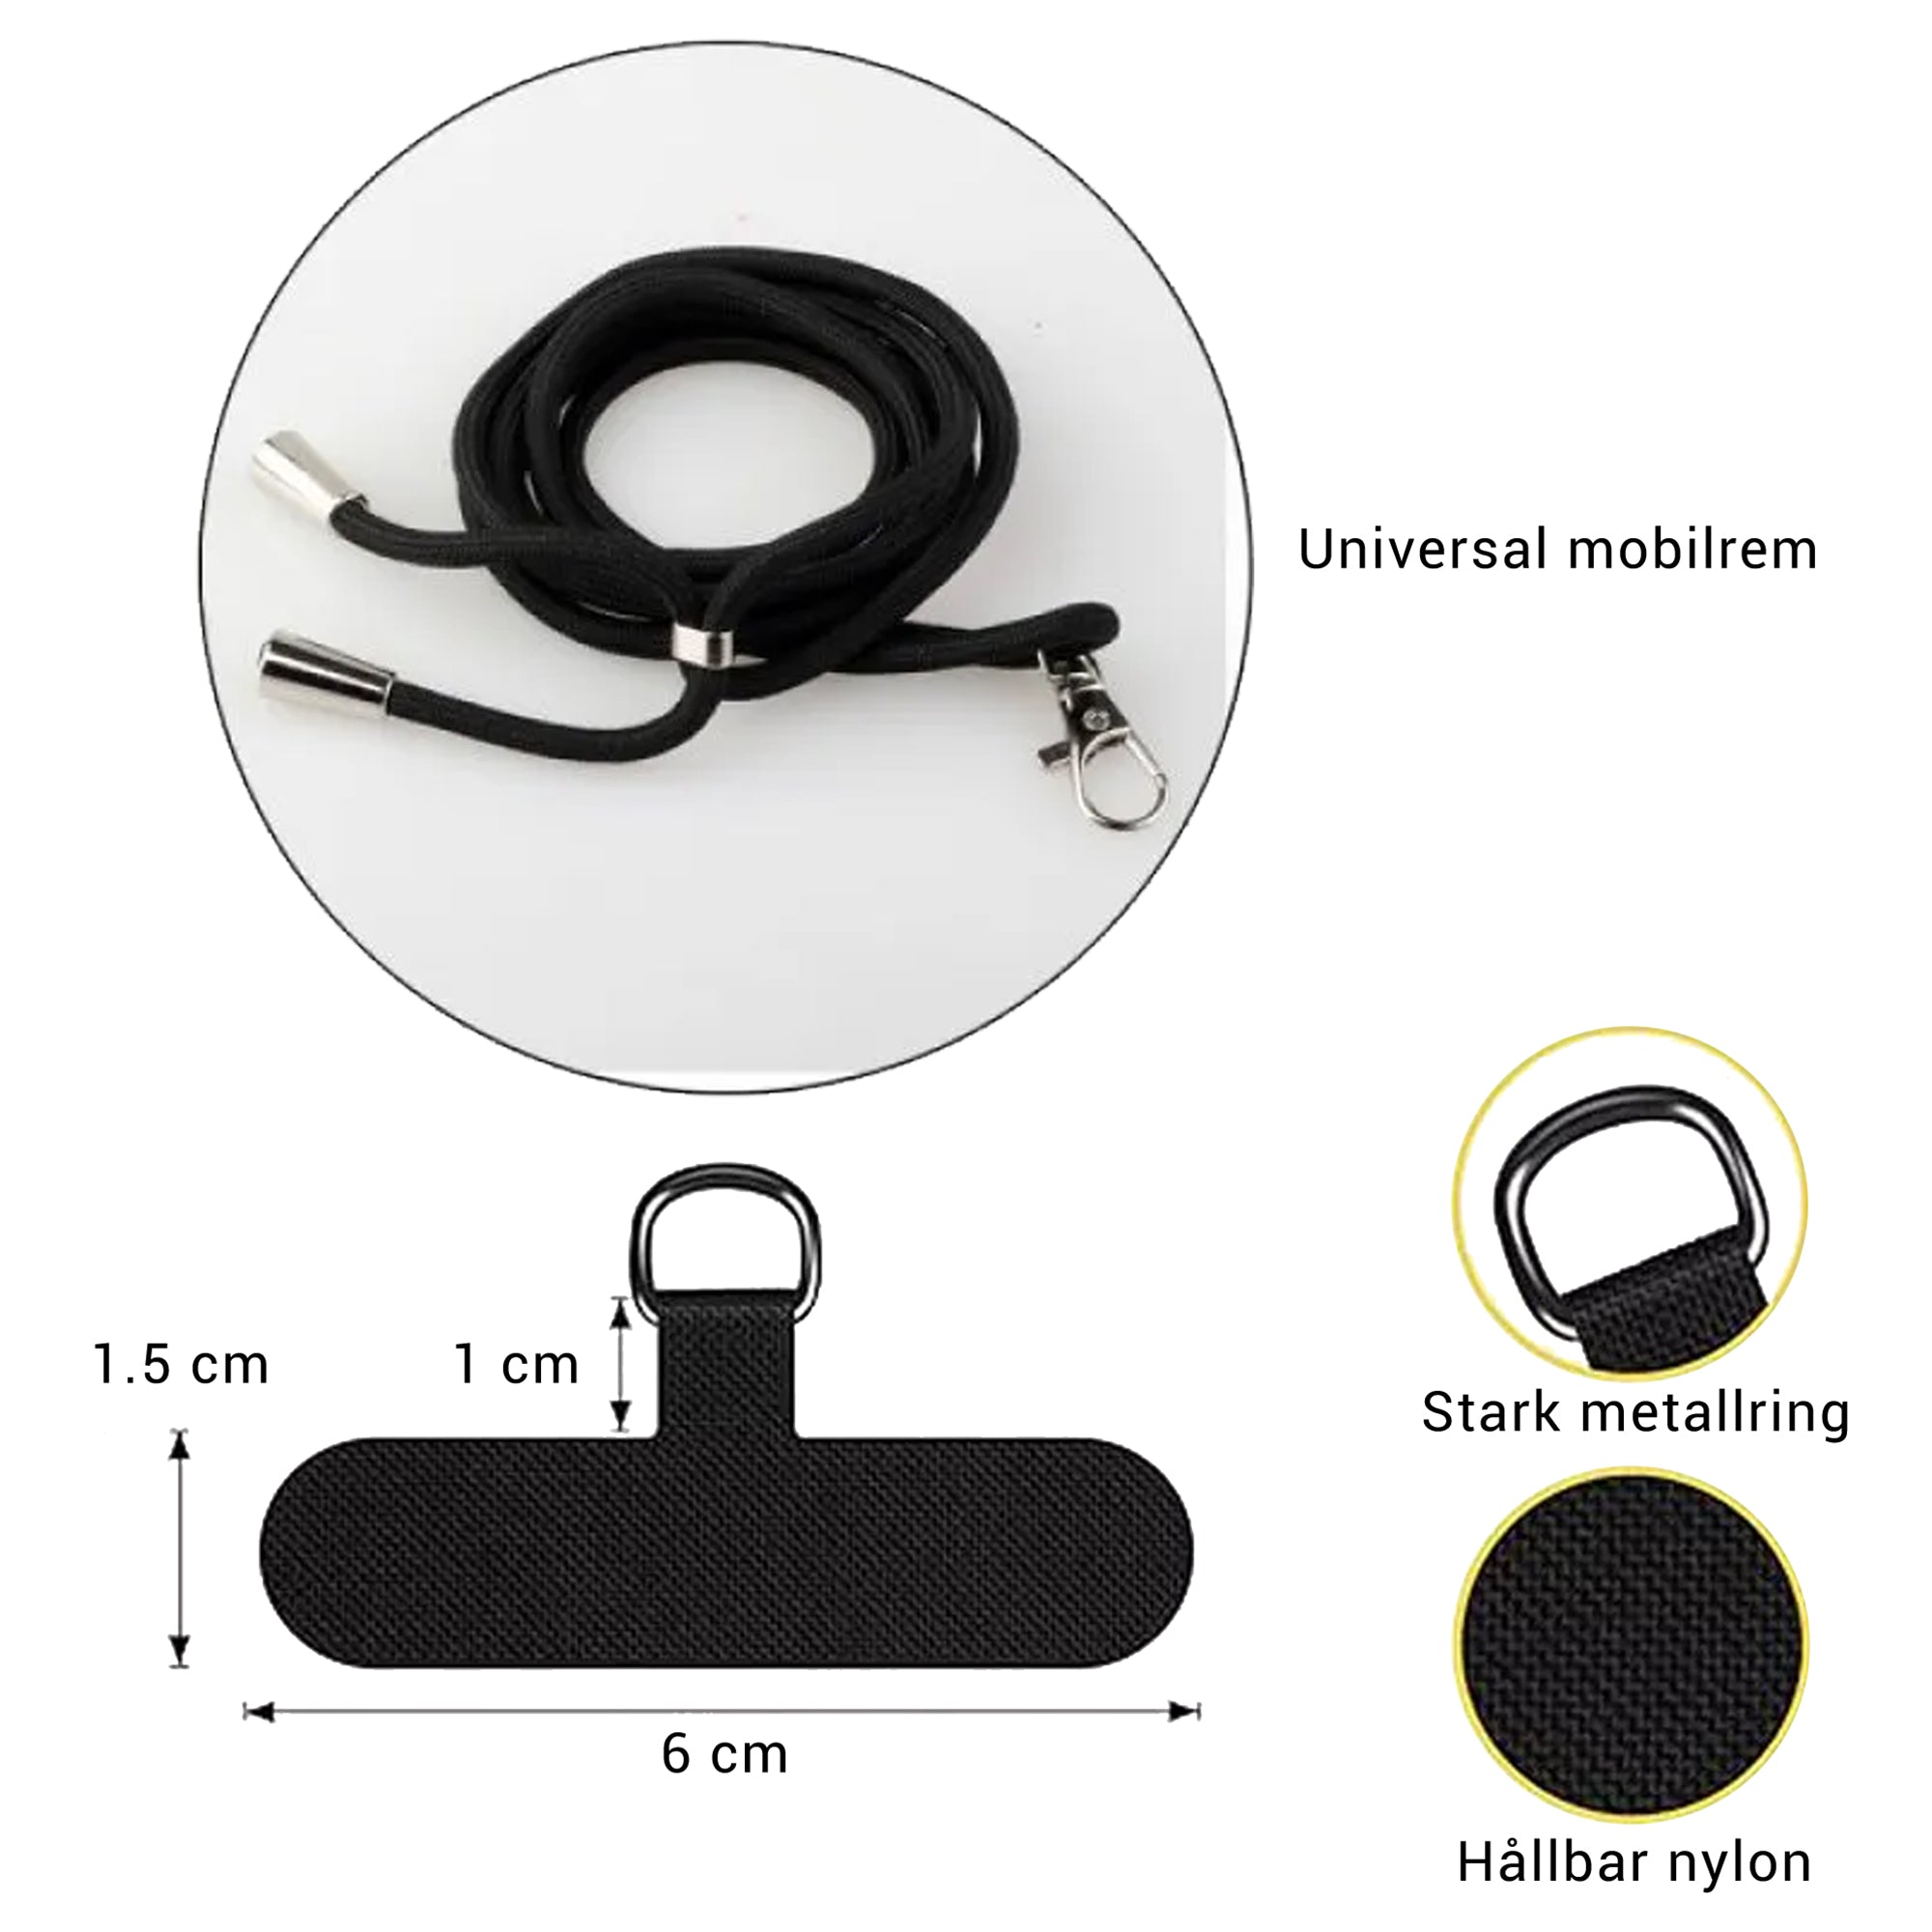 A black Bärrem för mobilskal with metal rings, a clip, and an adjustable nylon strap. Measurements include a 1 cm by 1.5 cm ring base and a 6 cm strap length. Text in Swedish and English describes materials. Universell bärrem for all devices ensures compatibility with various phone cases.
